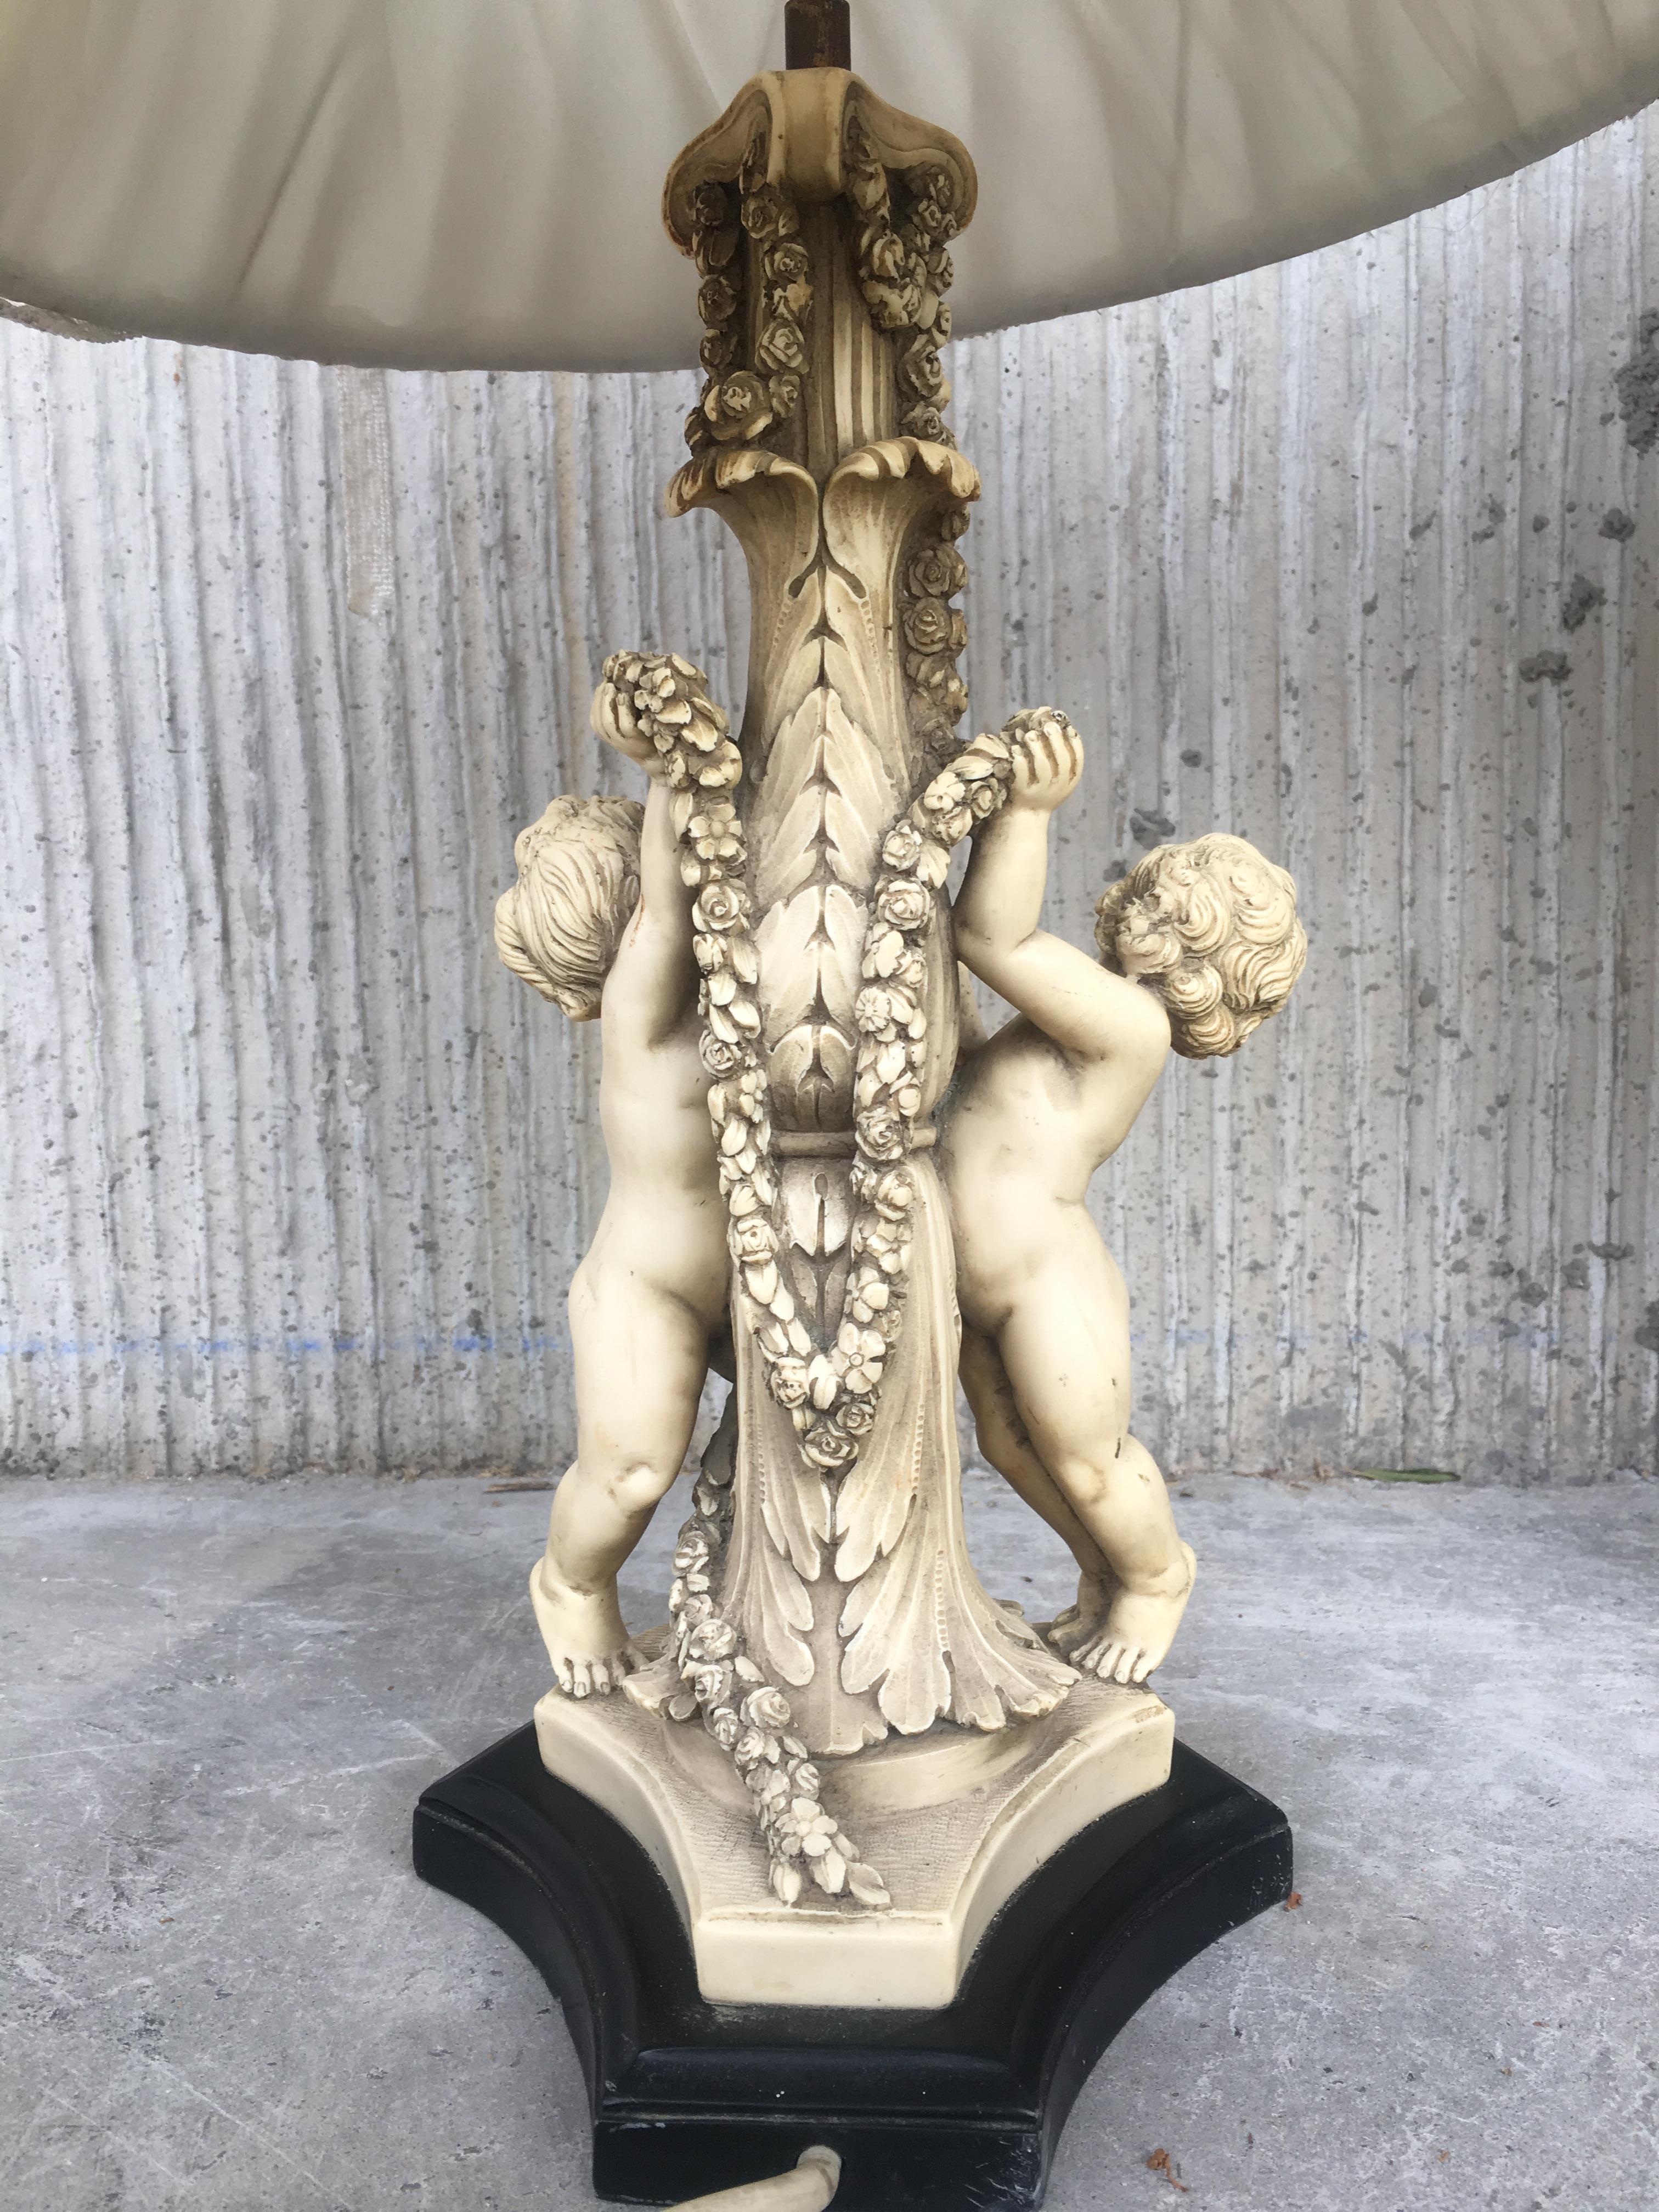 Neoclassical 20th Century Pair of White Resin Cherub Lamps on Wooden Bases by G. Ruggeri For Sale